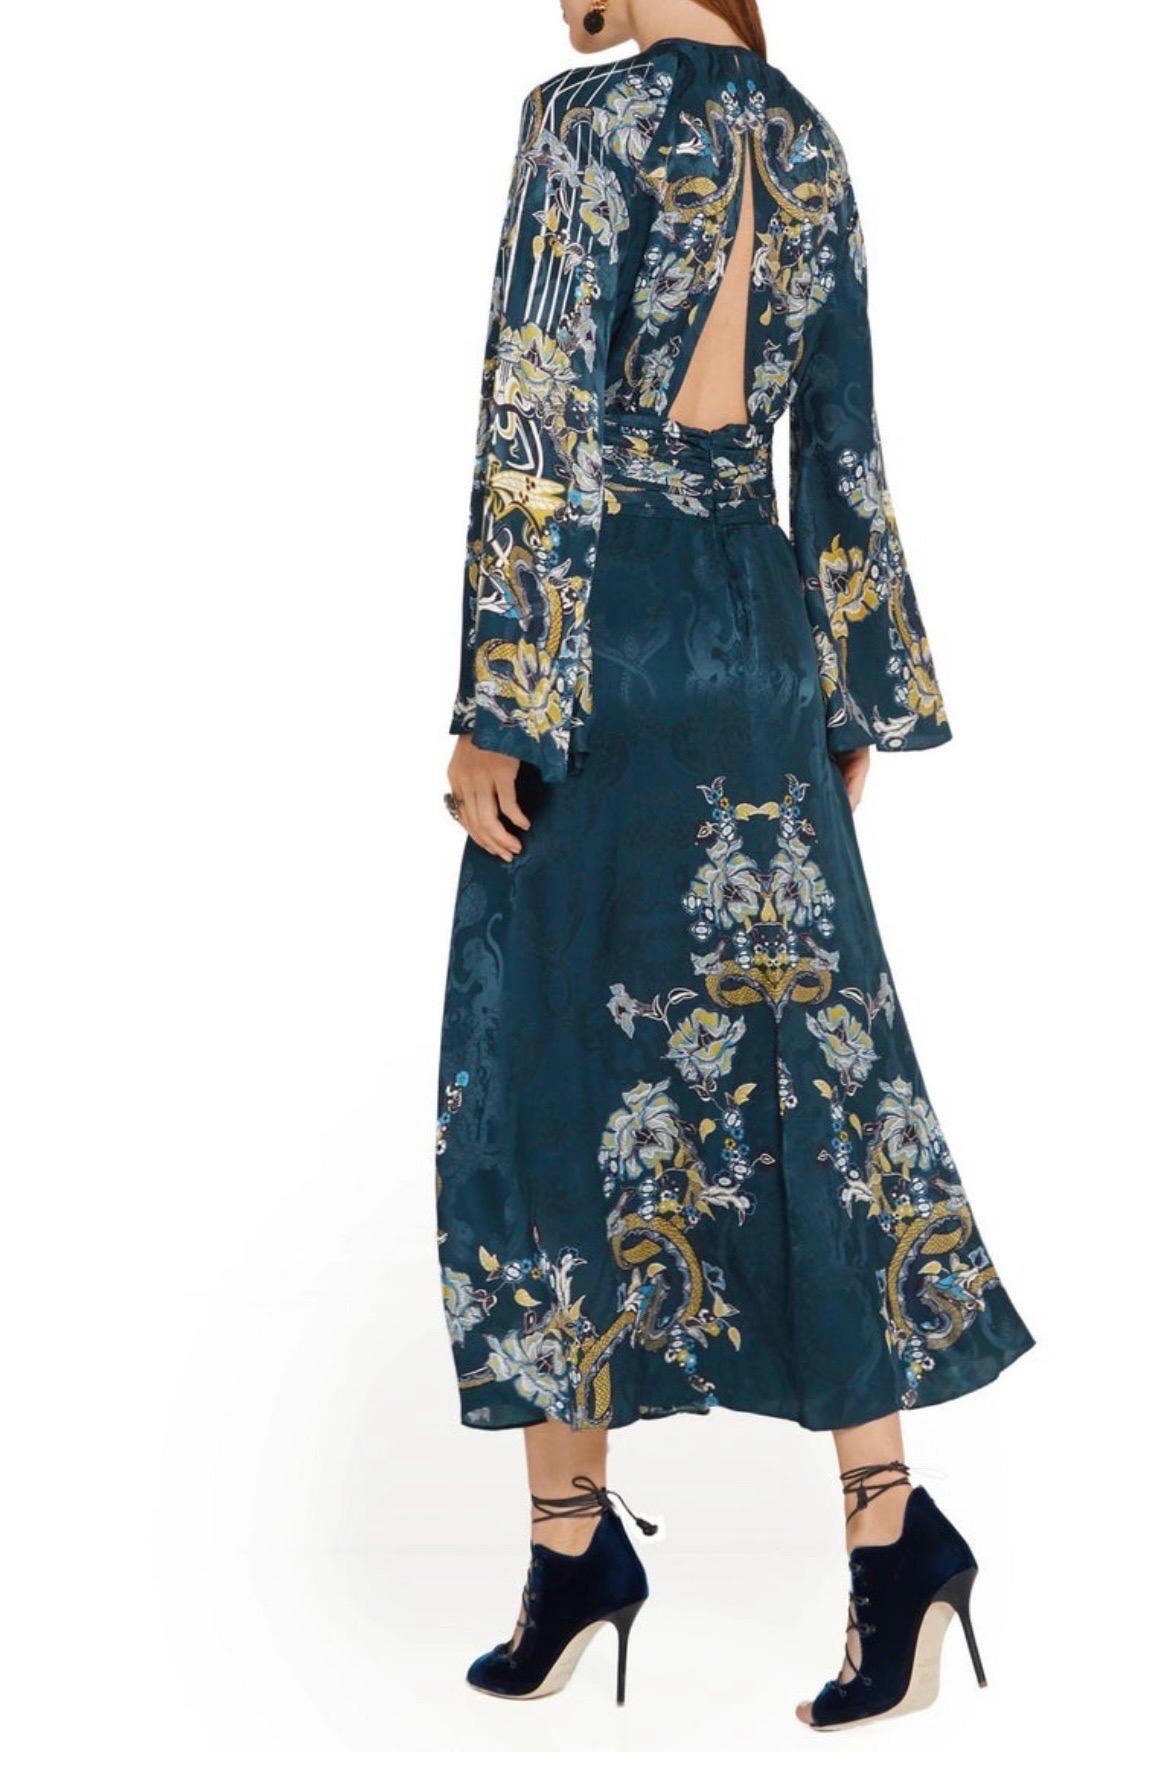 New Roberto Cavalli Printed Long Sleeve Dress 38 - 2 In New Condition For Sale In Montgomery, TX